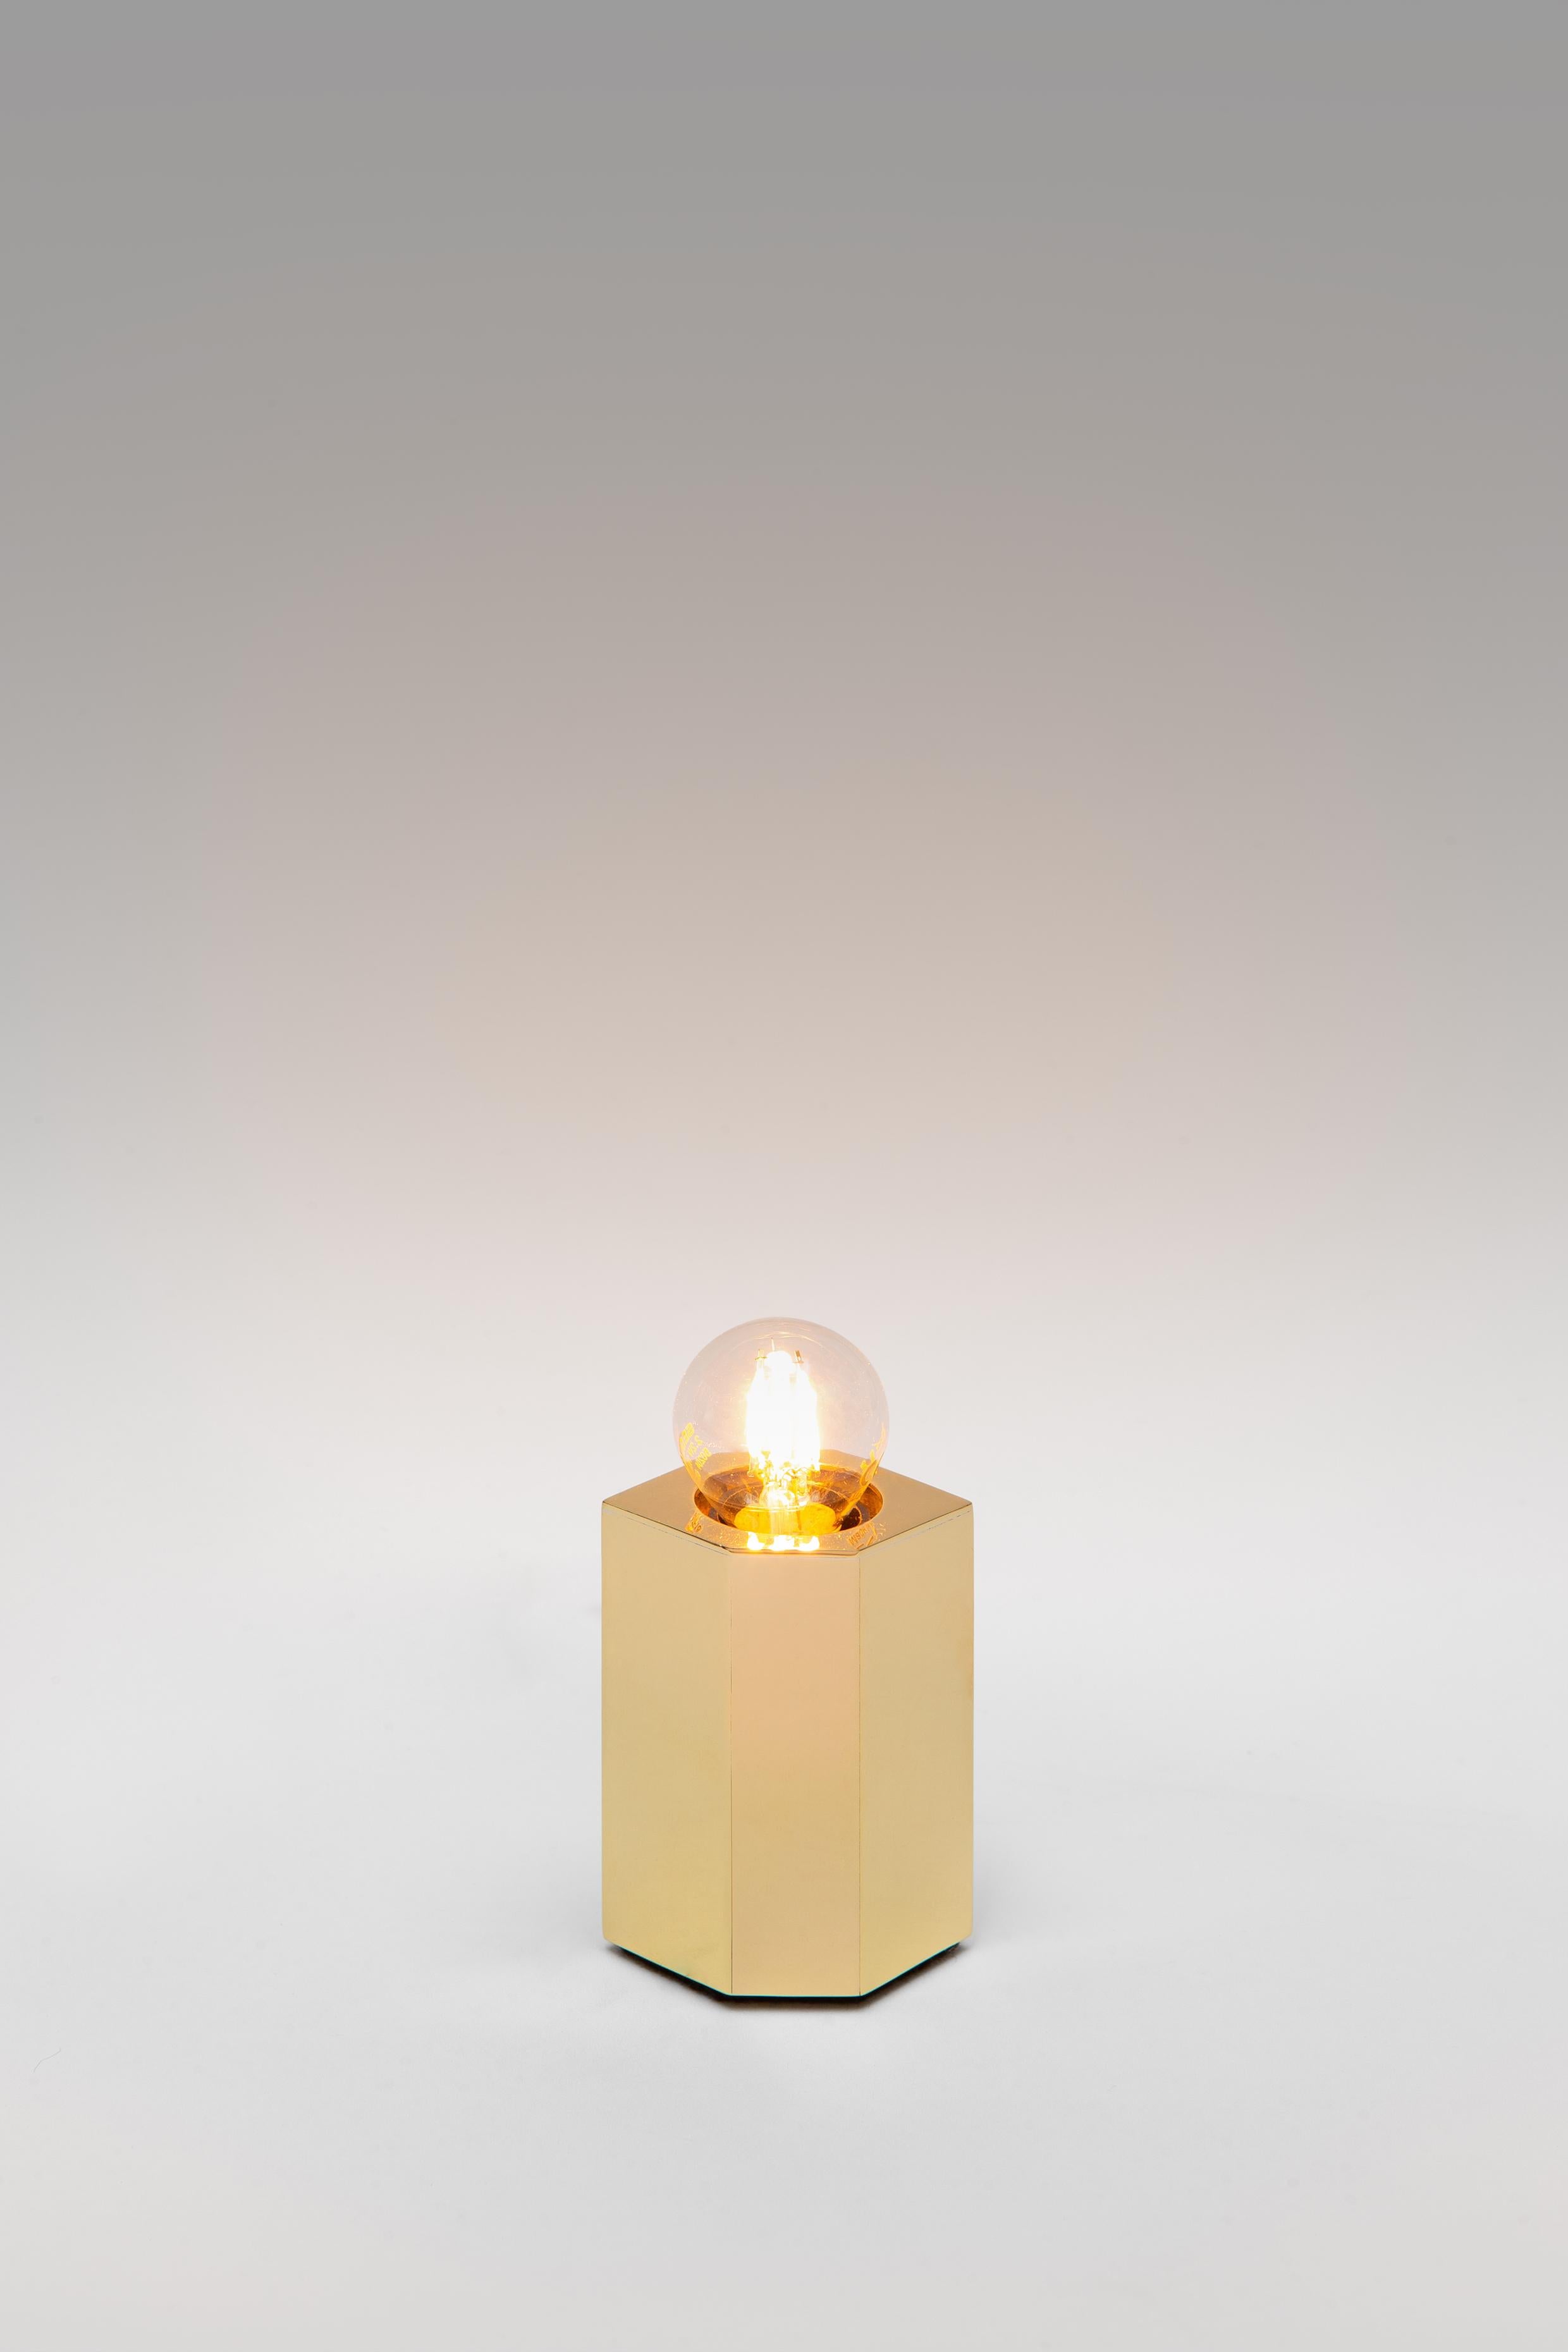 Jewel light 6 is presented by Koen van Guijze

Small geometrical shapes, turned in gold. Like art, light objects can give warmth and inspiration. Koen has creates several light objects that give comfort for the soul. This work is made to order.
 